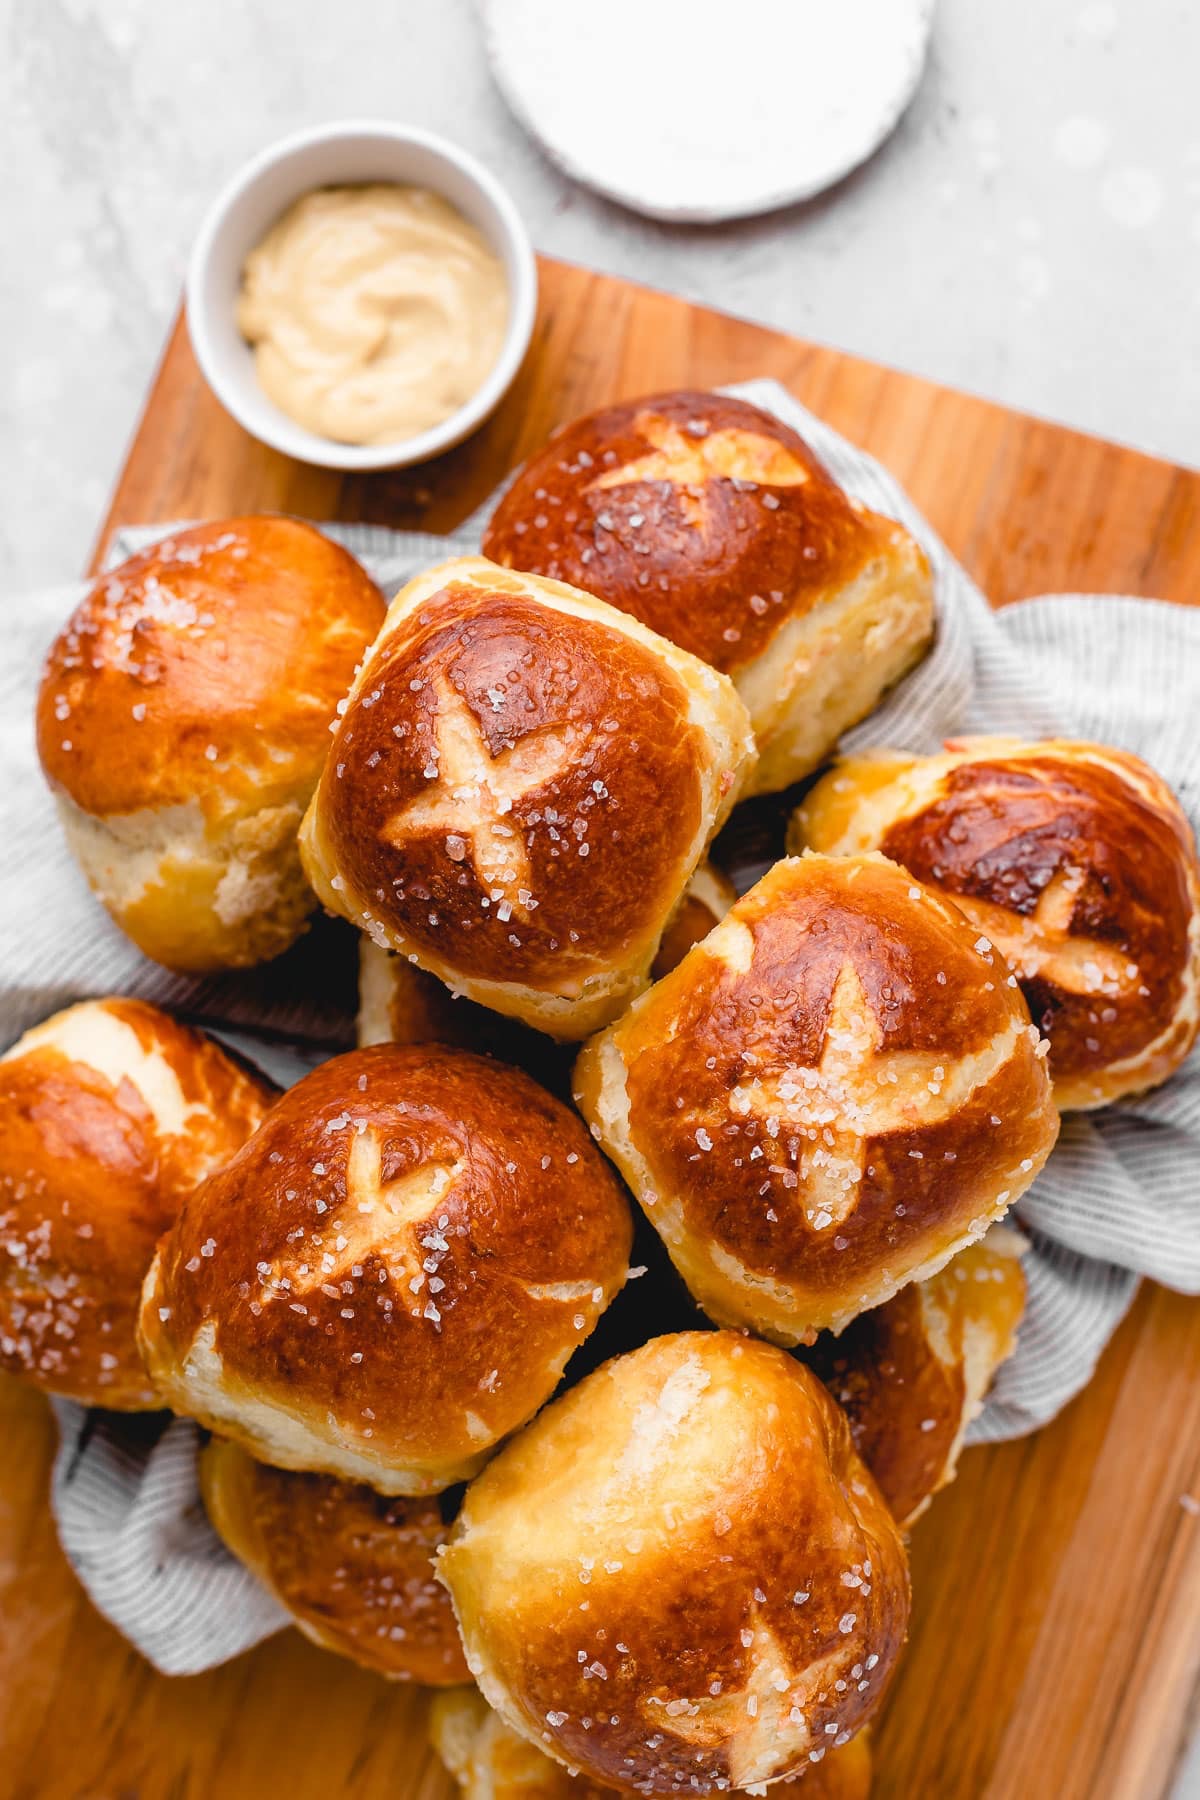 Pretzel-style buns stacked on a wooden cutting board.